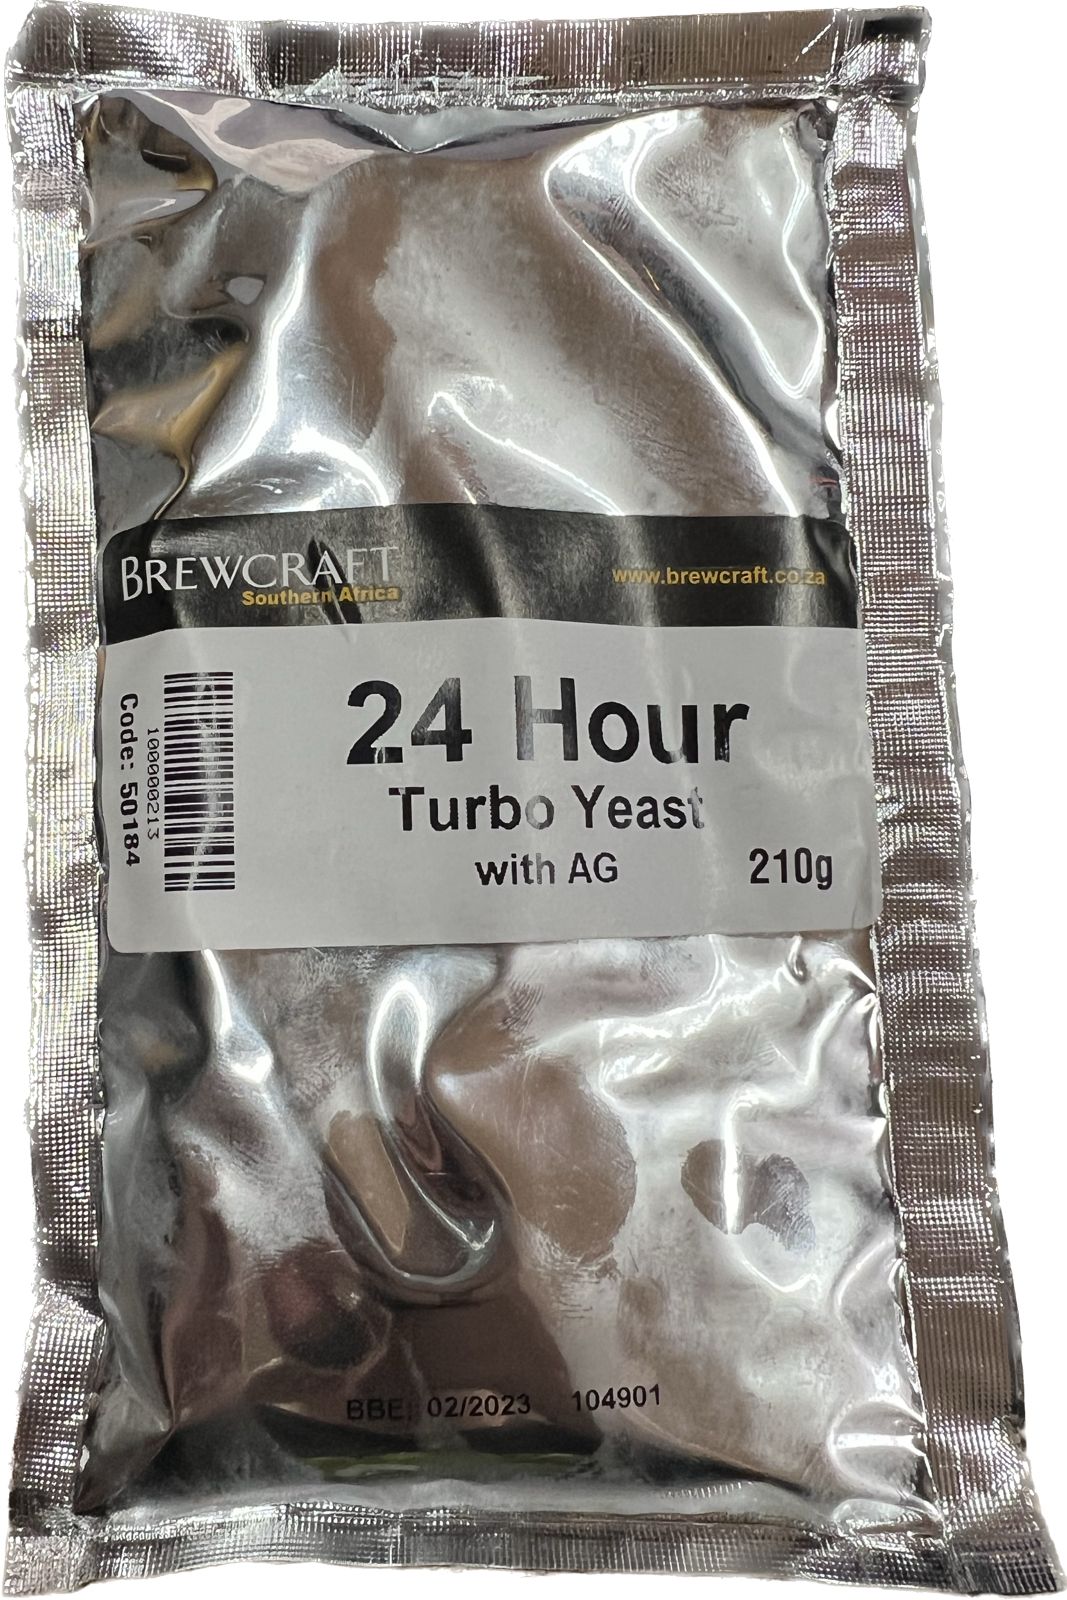 24 Hour Turbo Yeast with AG 210g